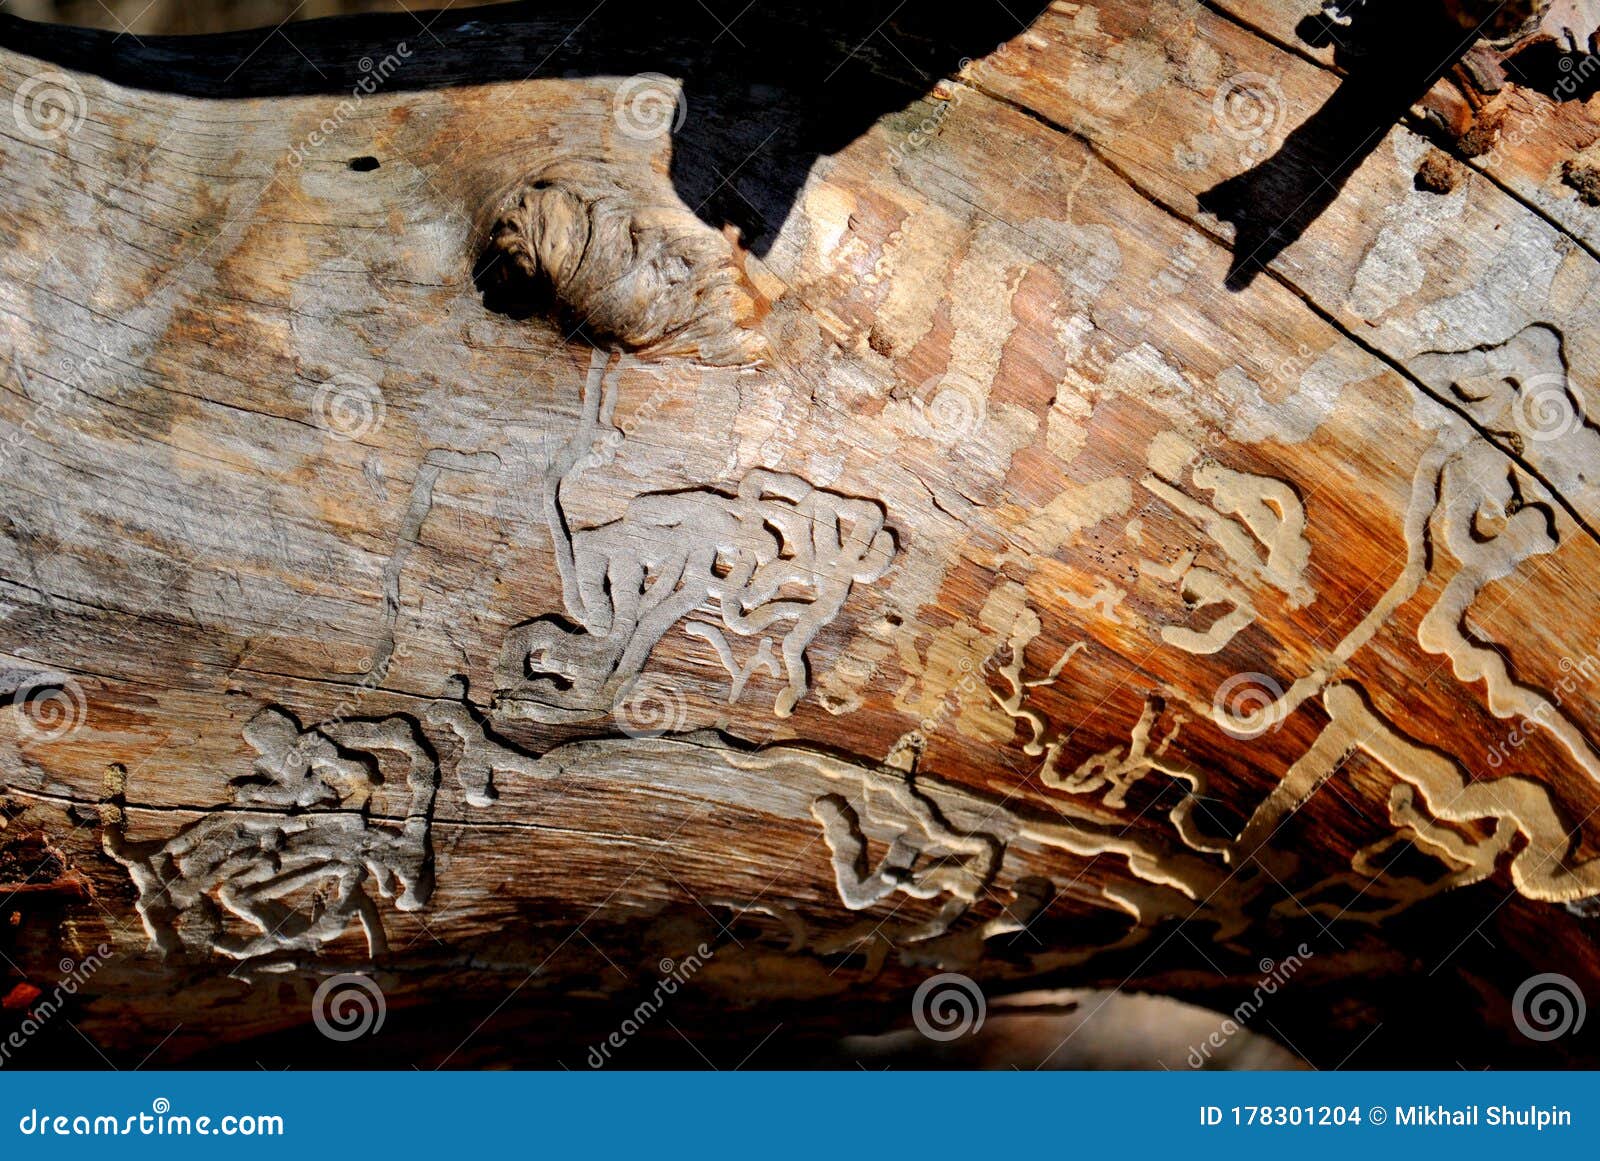 The Structure of a Dry Tree Eaten by a Bark Beetle Stock Photo - Image ...